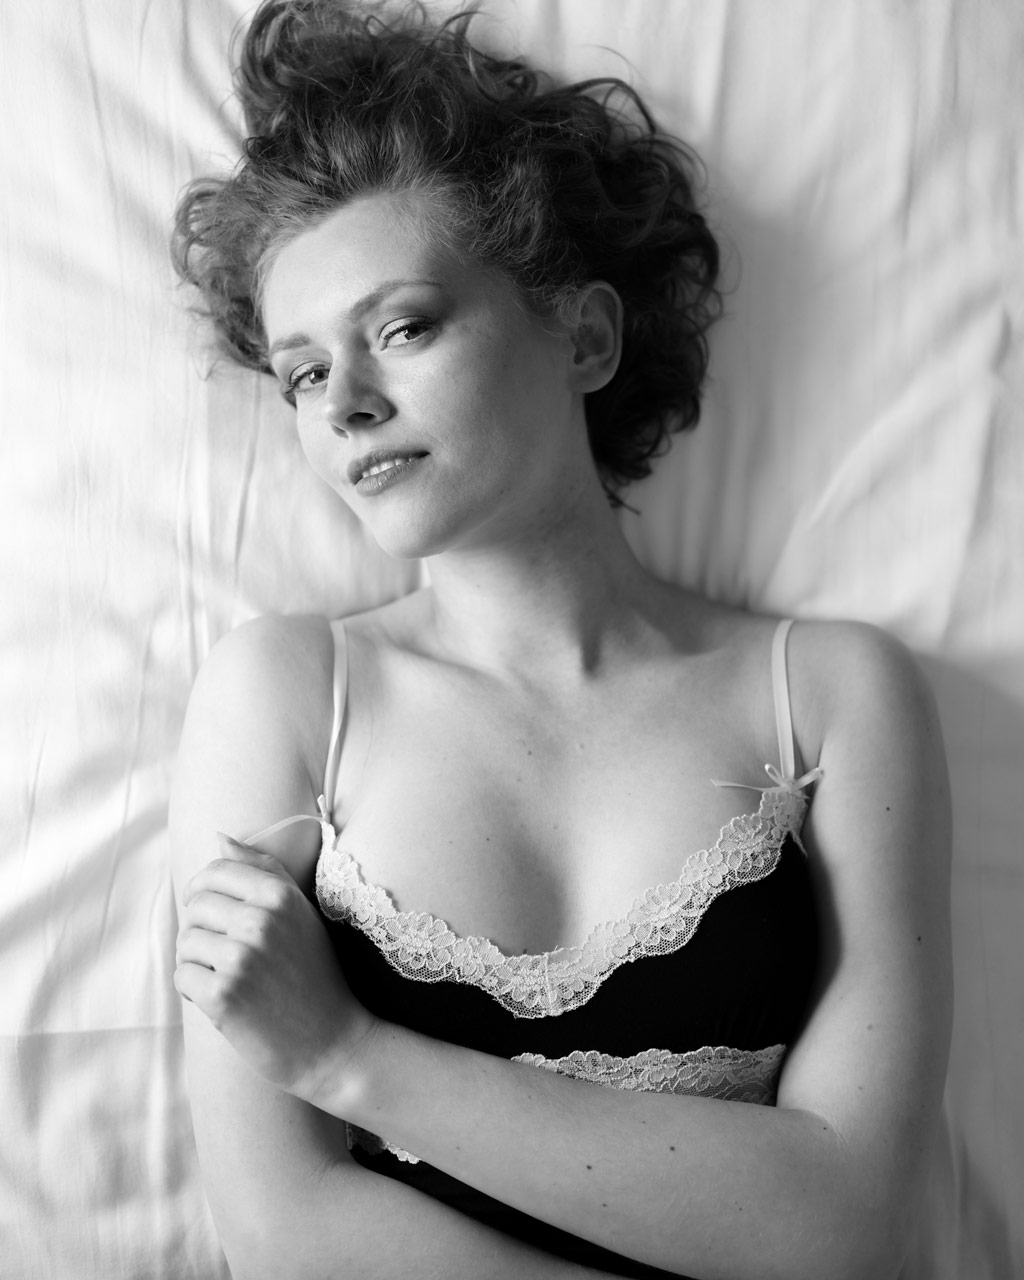 Get started with boudoir photography photo